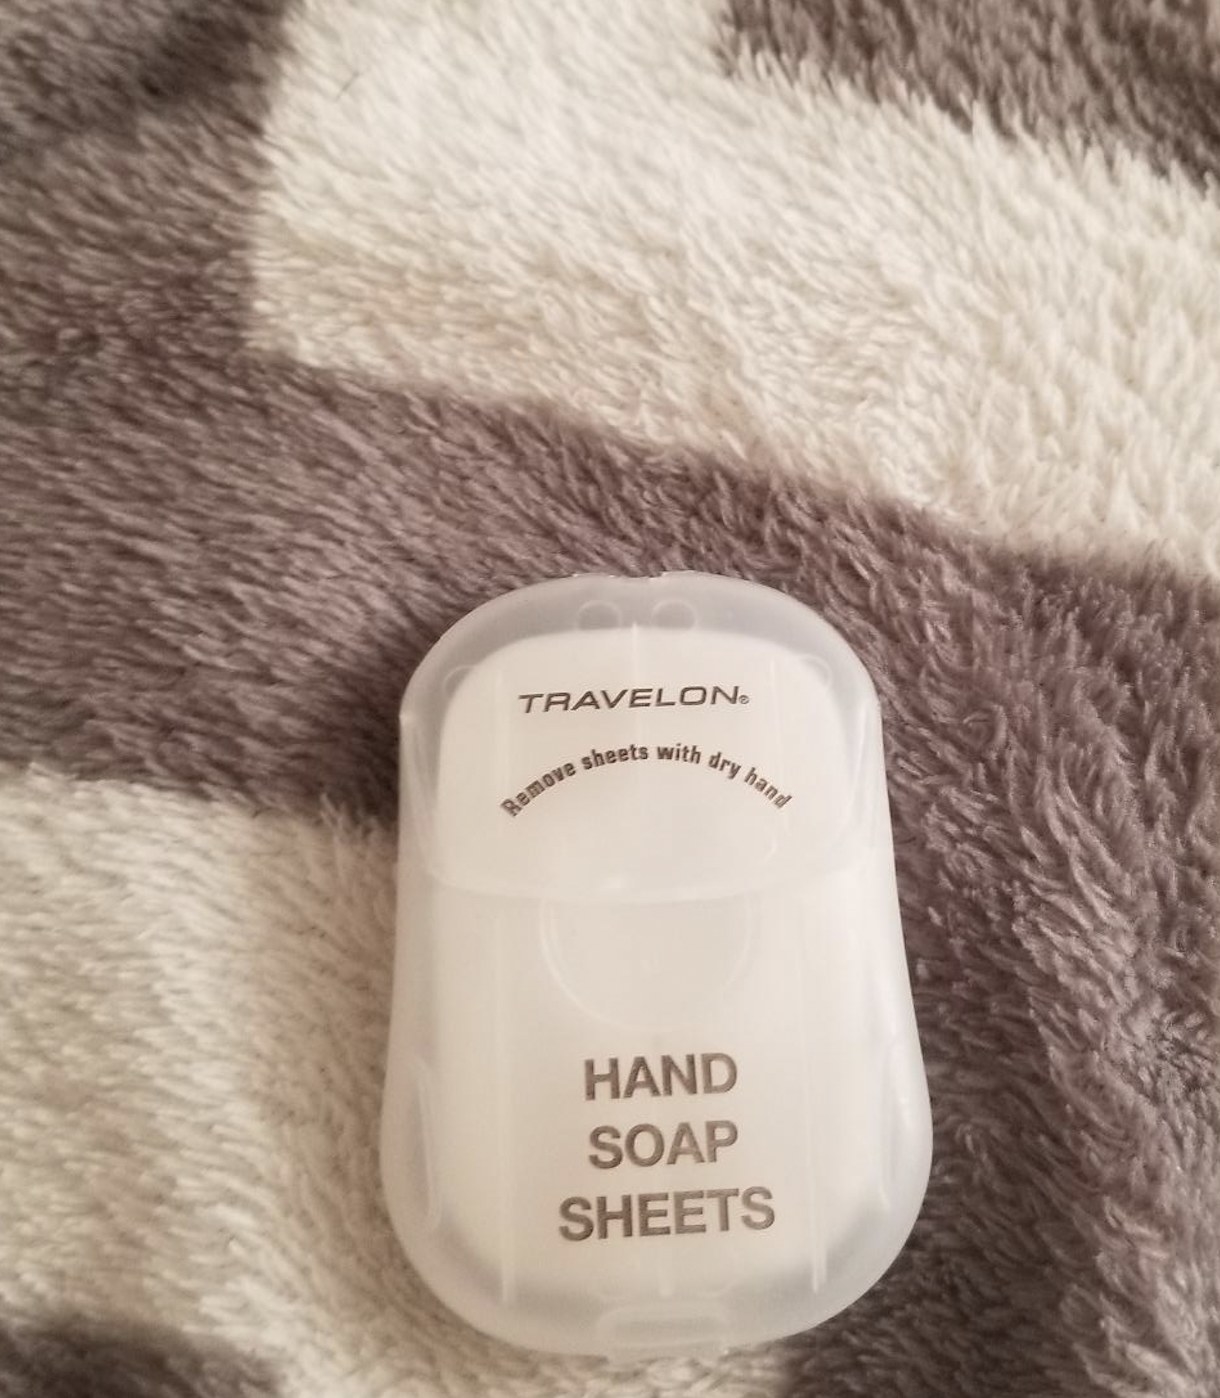 The hand soap sheets in pocket-sized dispenser case